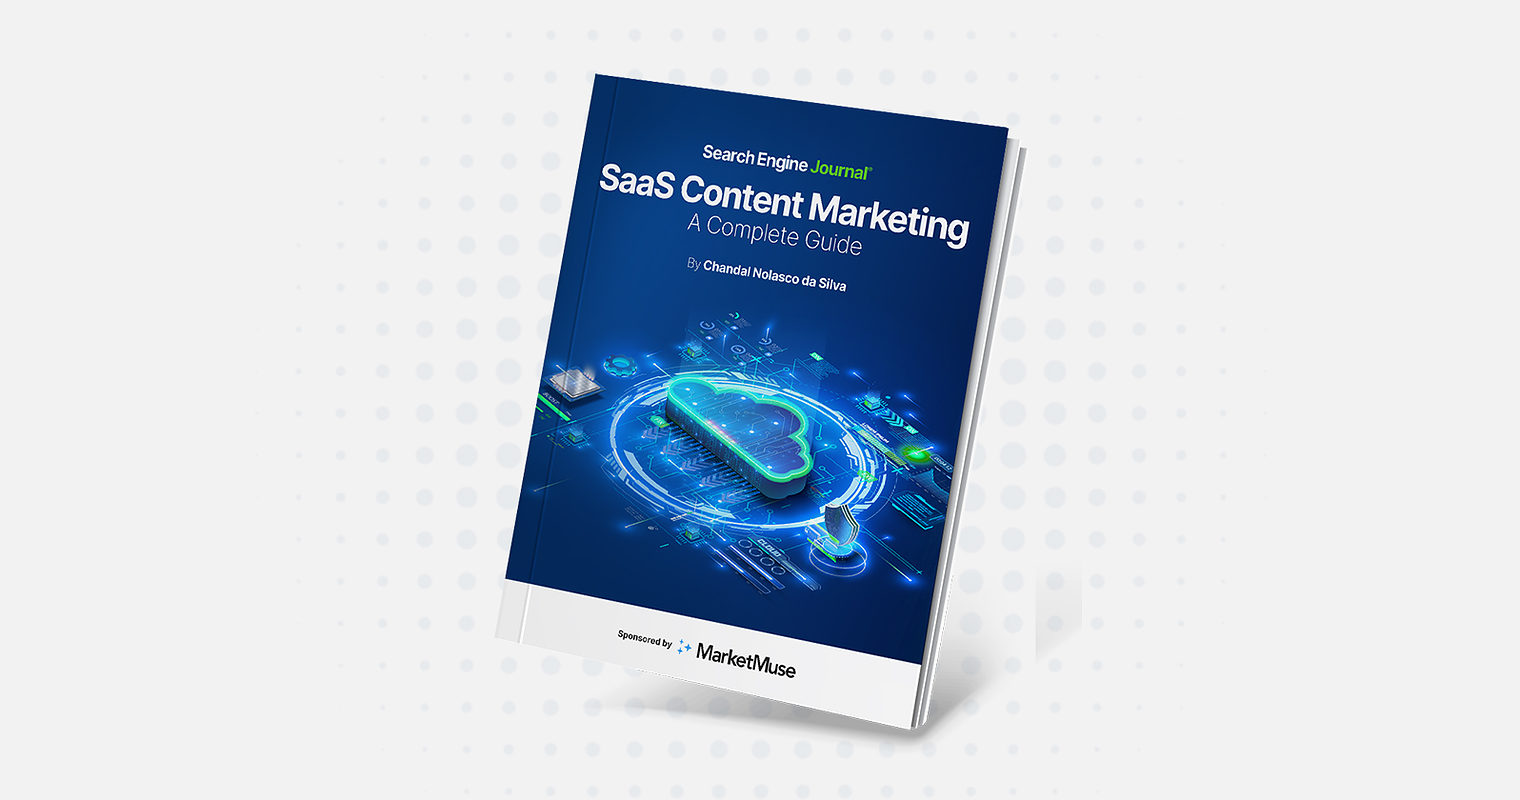 Learn To Engage New SaaS Customers With Content Marketing [eBook]